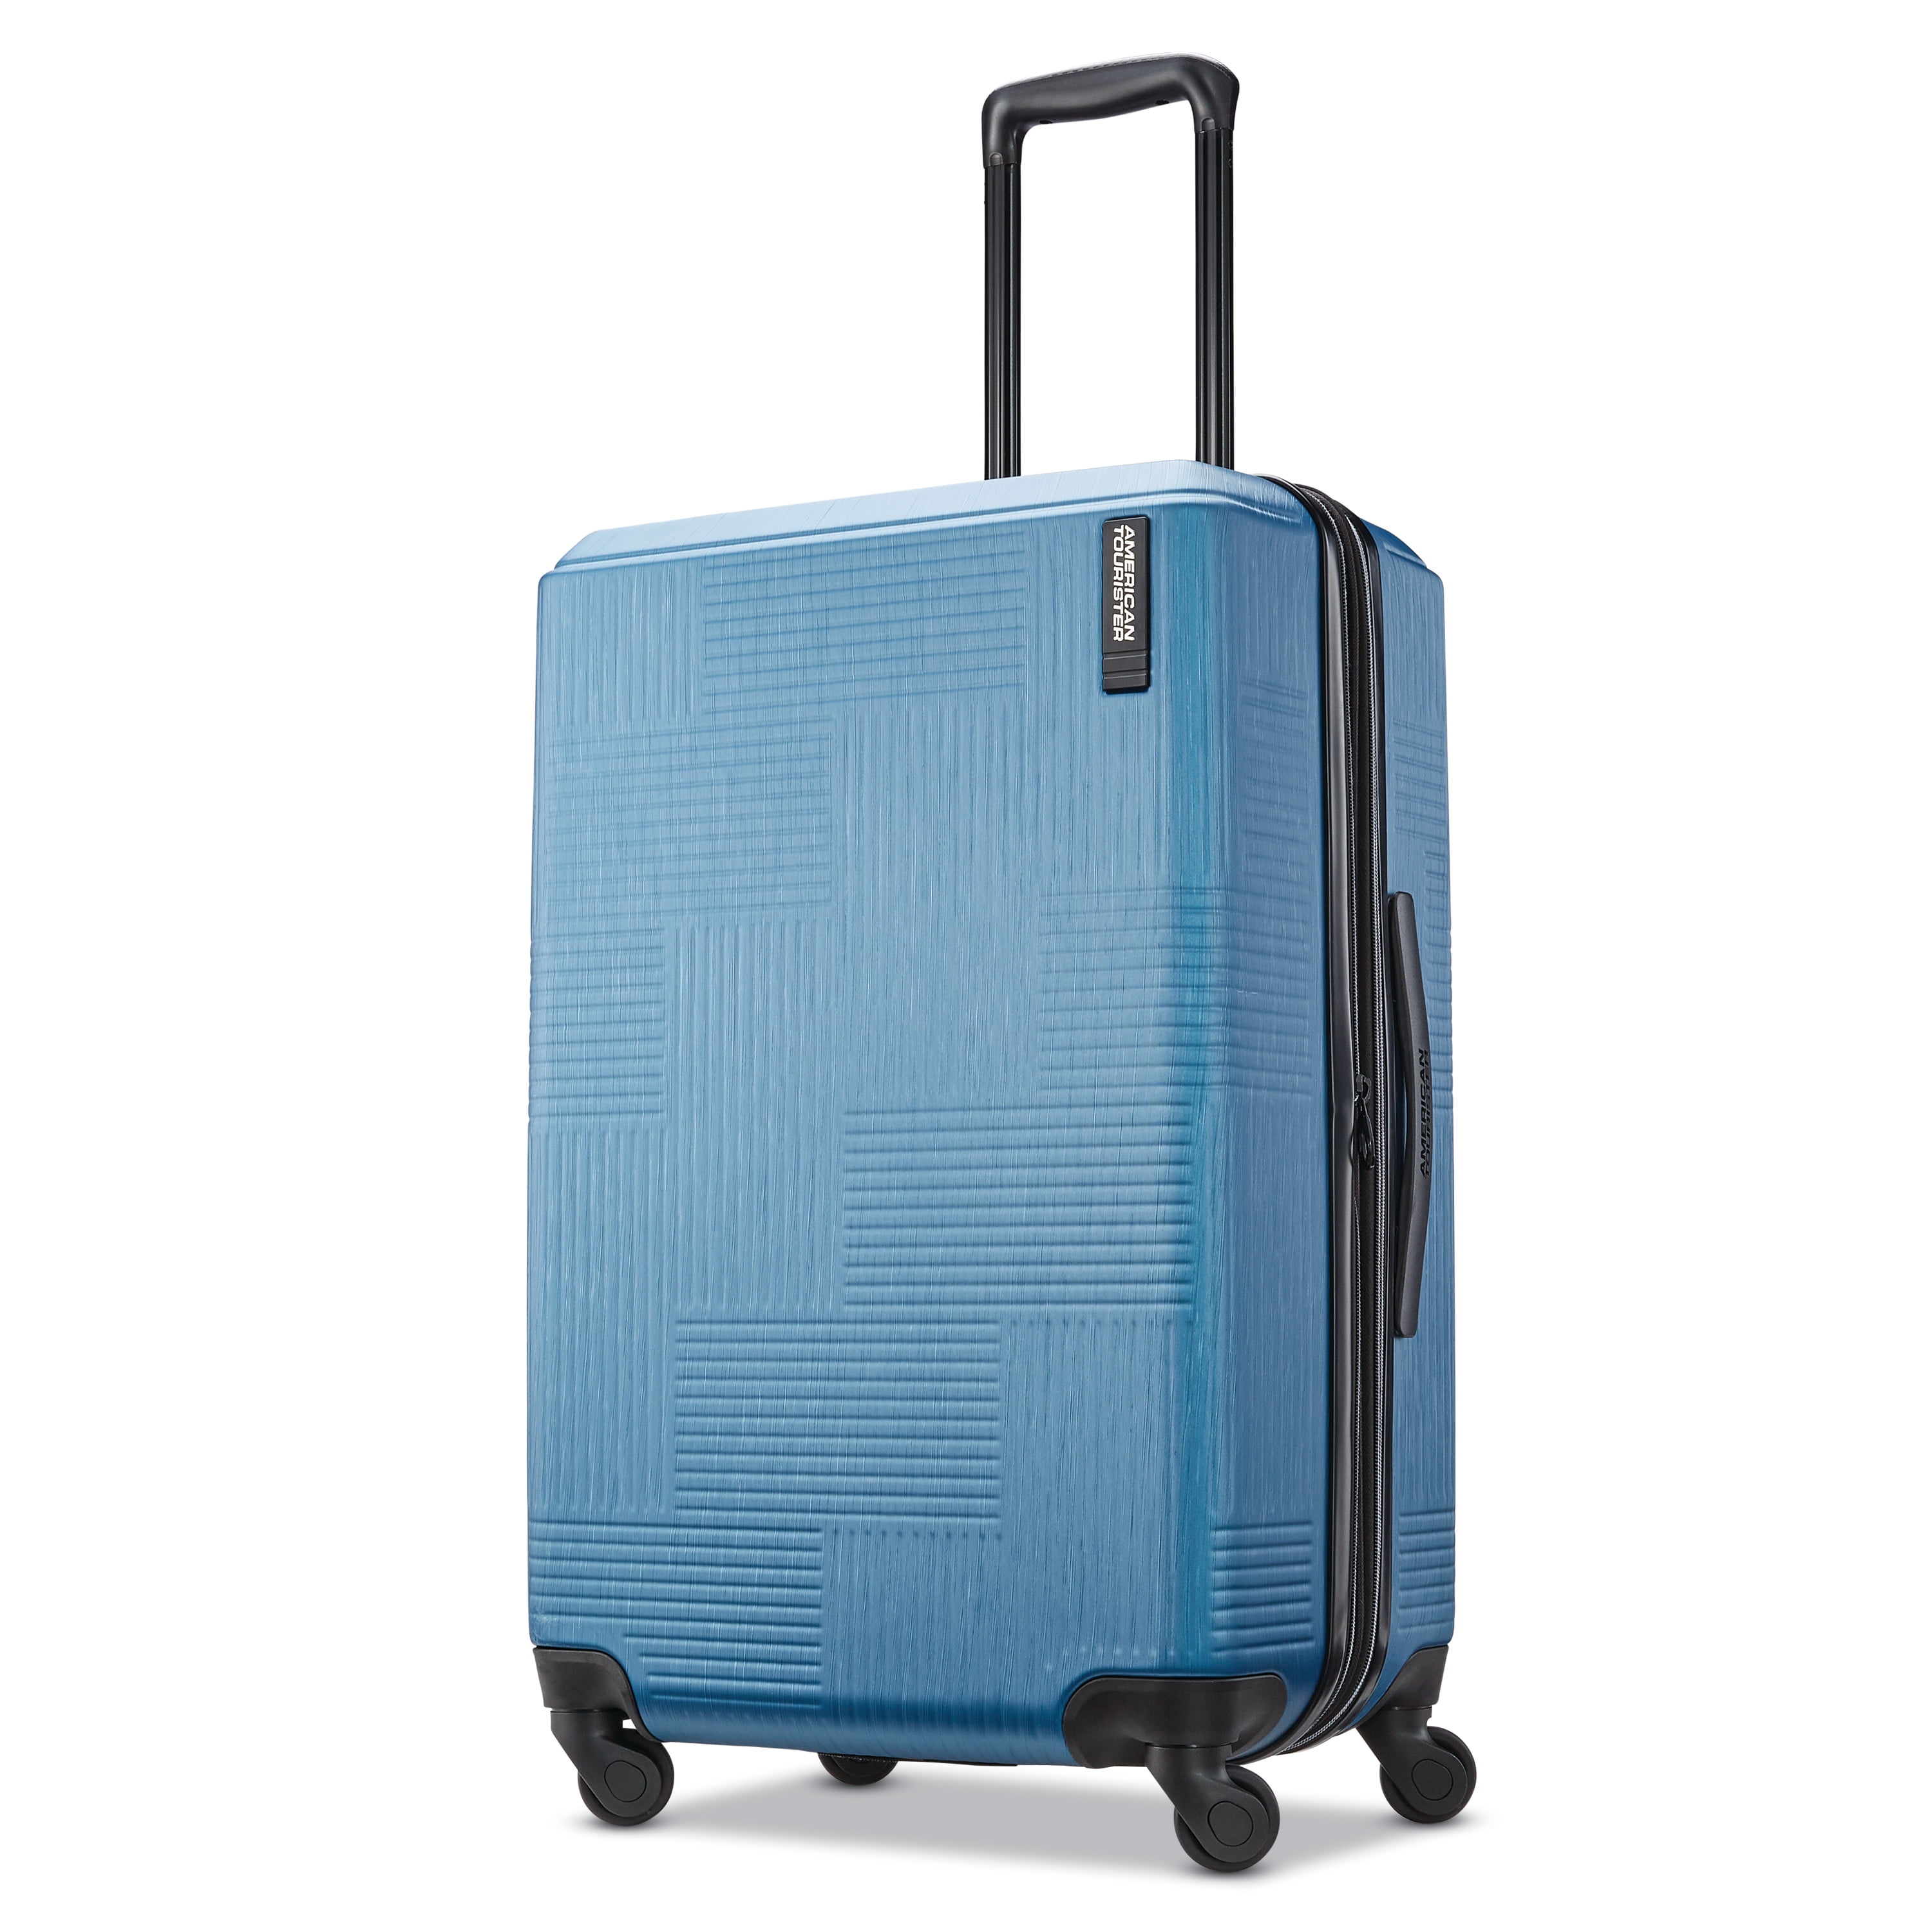 American XLT Spinner, Checked Luggage, One Piece - Walmart.com